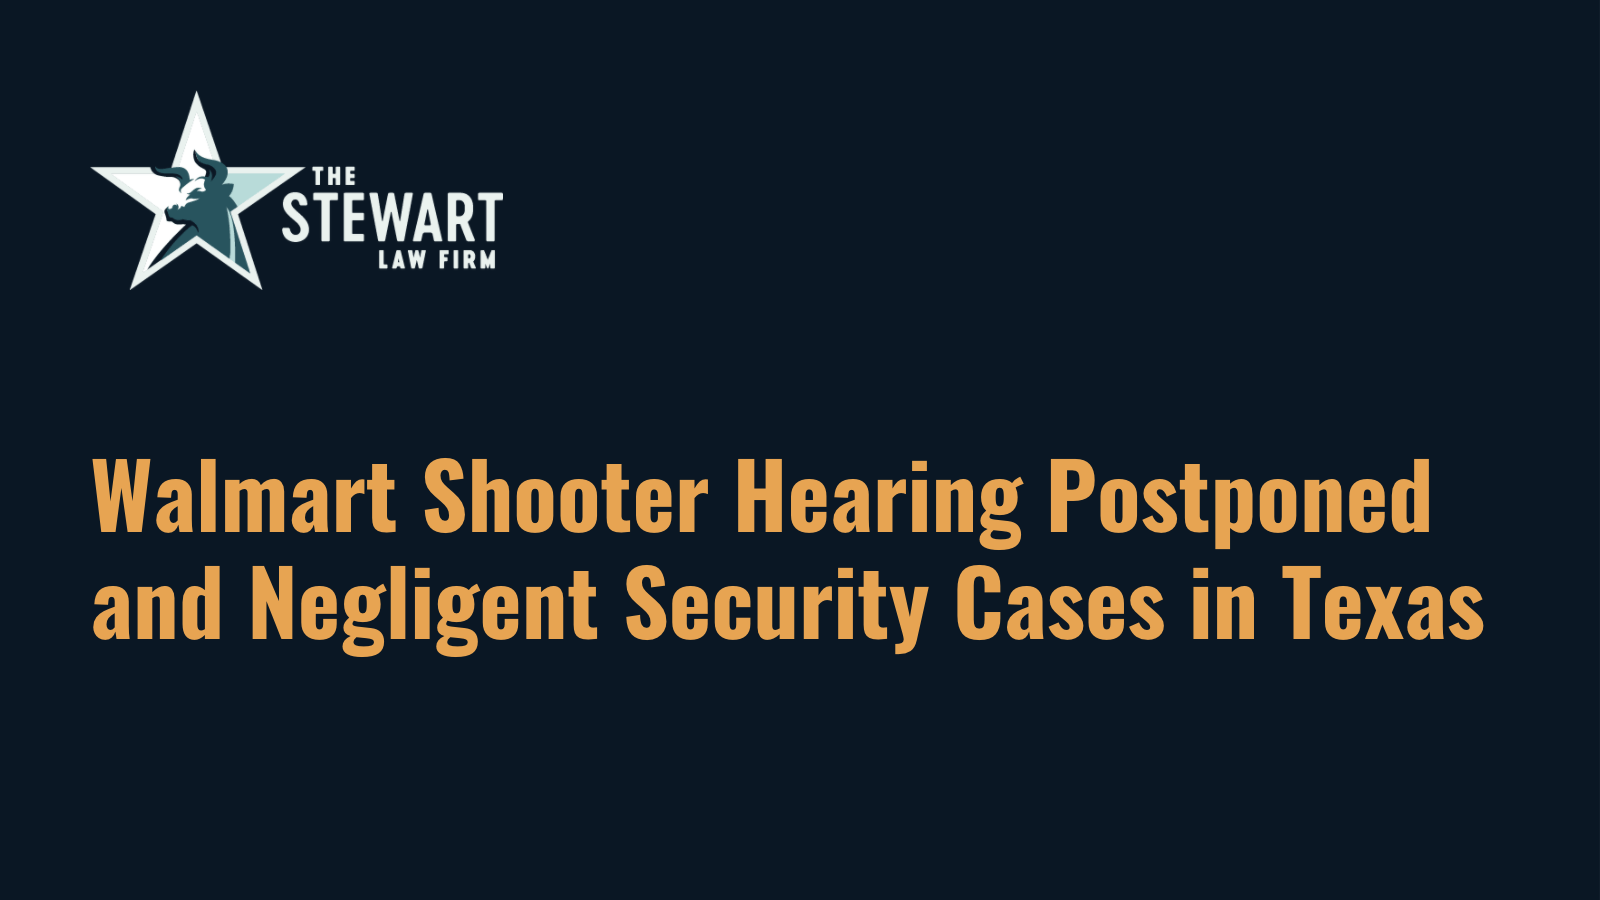 Walmart Shooter Hearing Postponed and Negligent Security Cases in Texas - the stewart law firm - austin texas personal injury lawyer